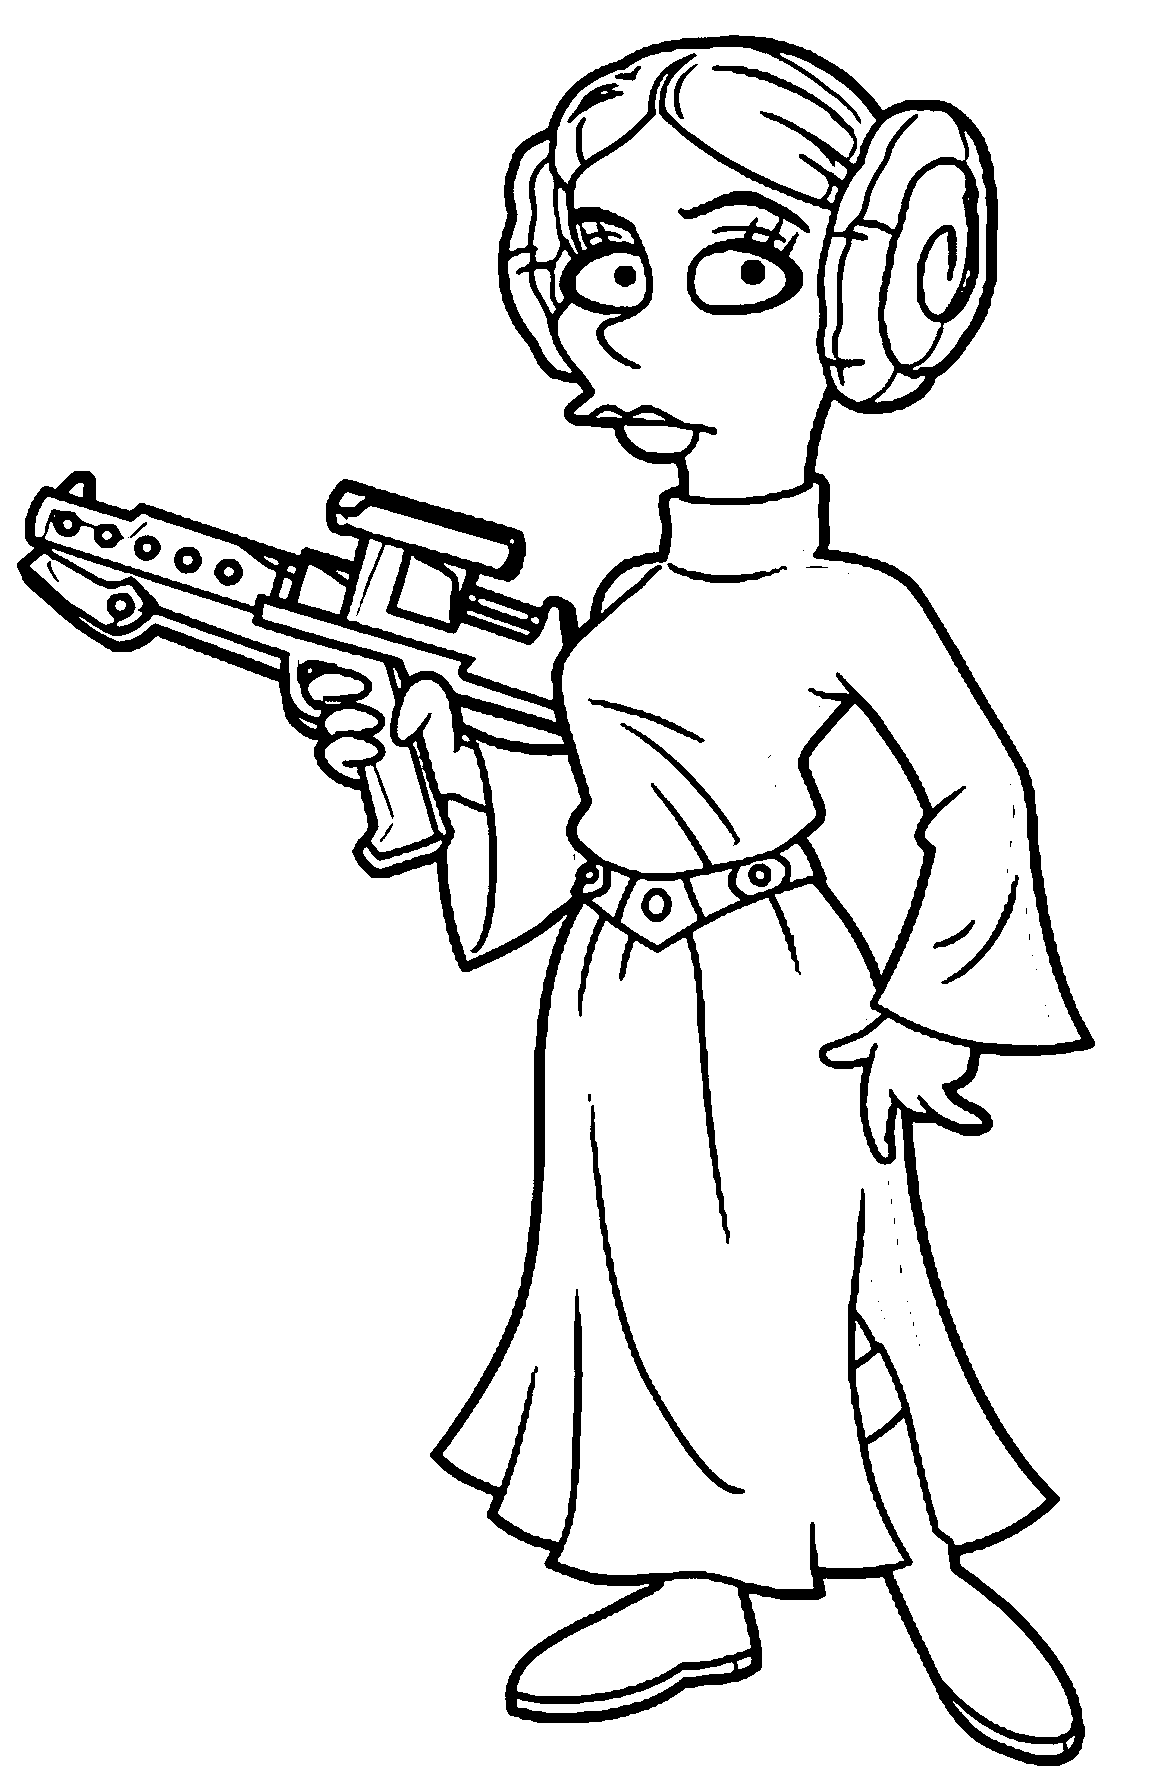 Download Princess Leia Coloring Pages - Coloring Home